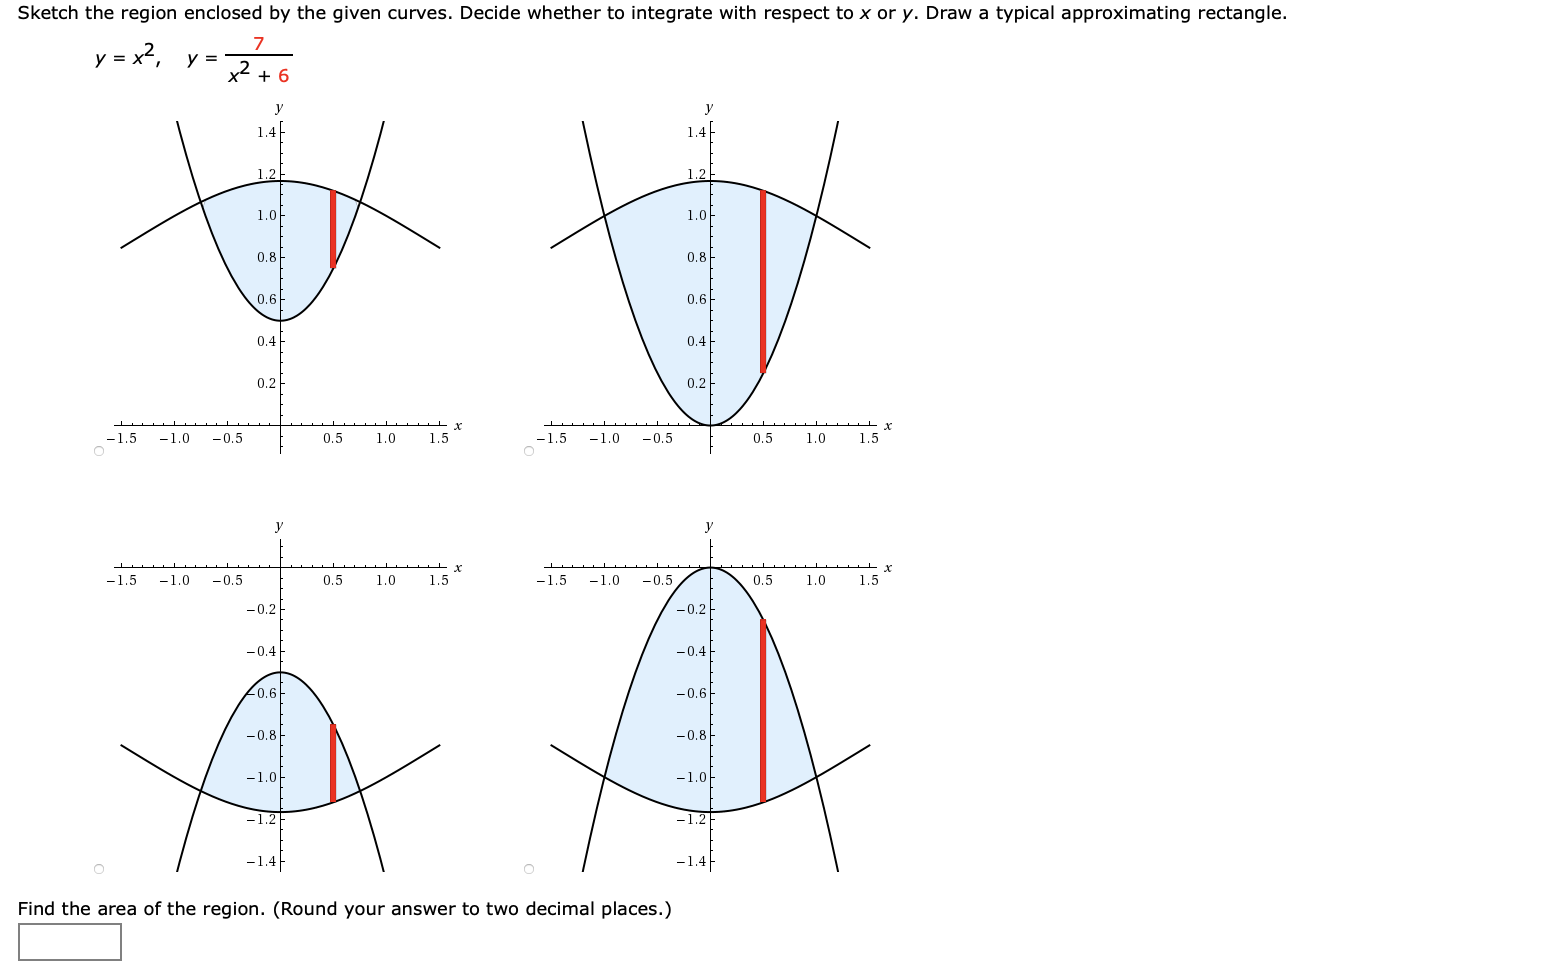 Sketch the region enclosed by the given curves. Decide whether to integrate with respect to x or y. Draw a typical approximating rectangle.
7
y = x2, y =
+ 6
1.4
1.4
1.2
1.2
1.0
1.아
0.8
0.8
0.6-
0.6
0.4
0.4-
0.2
0.2
-1.5
-1.0
-0.5
0.5
1.0
1.5
-1.5
-1.0
-0.5
0.5
1.0
1.5
-1.5
-1.0
-0.5
0.5
1.0
1.5
-1.5
-1.0
-0.5
0.5
1.0
1.5
-0.2
-0.2
-0.4
-0.4
Lo.6아
-0.6
-0.8
-0.8
-1.0
-1.0아
-1.2
-1.2
-1.4|
-1.4
Find the area of the region. (Round your answer to two decimal places.)
